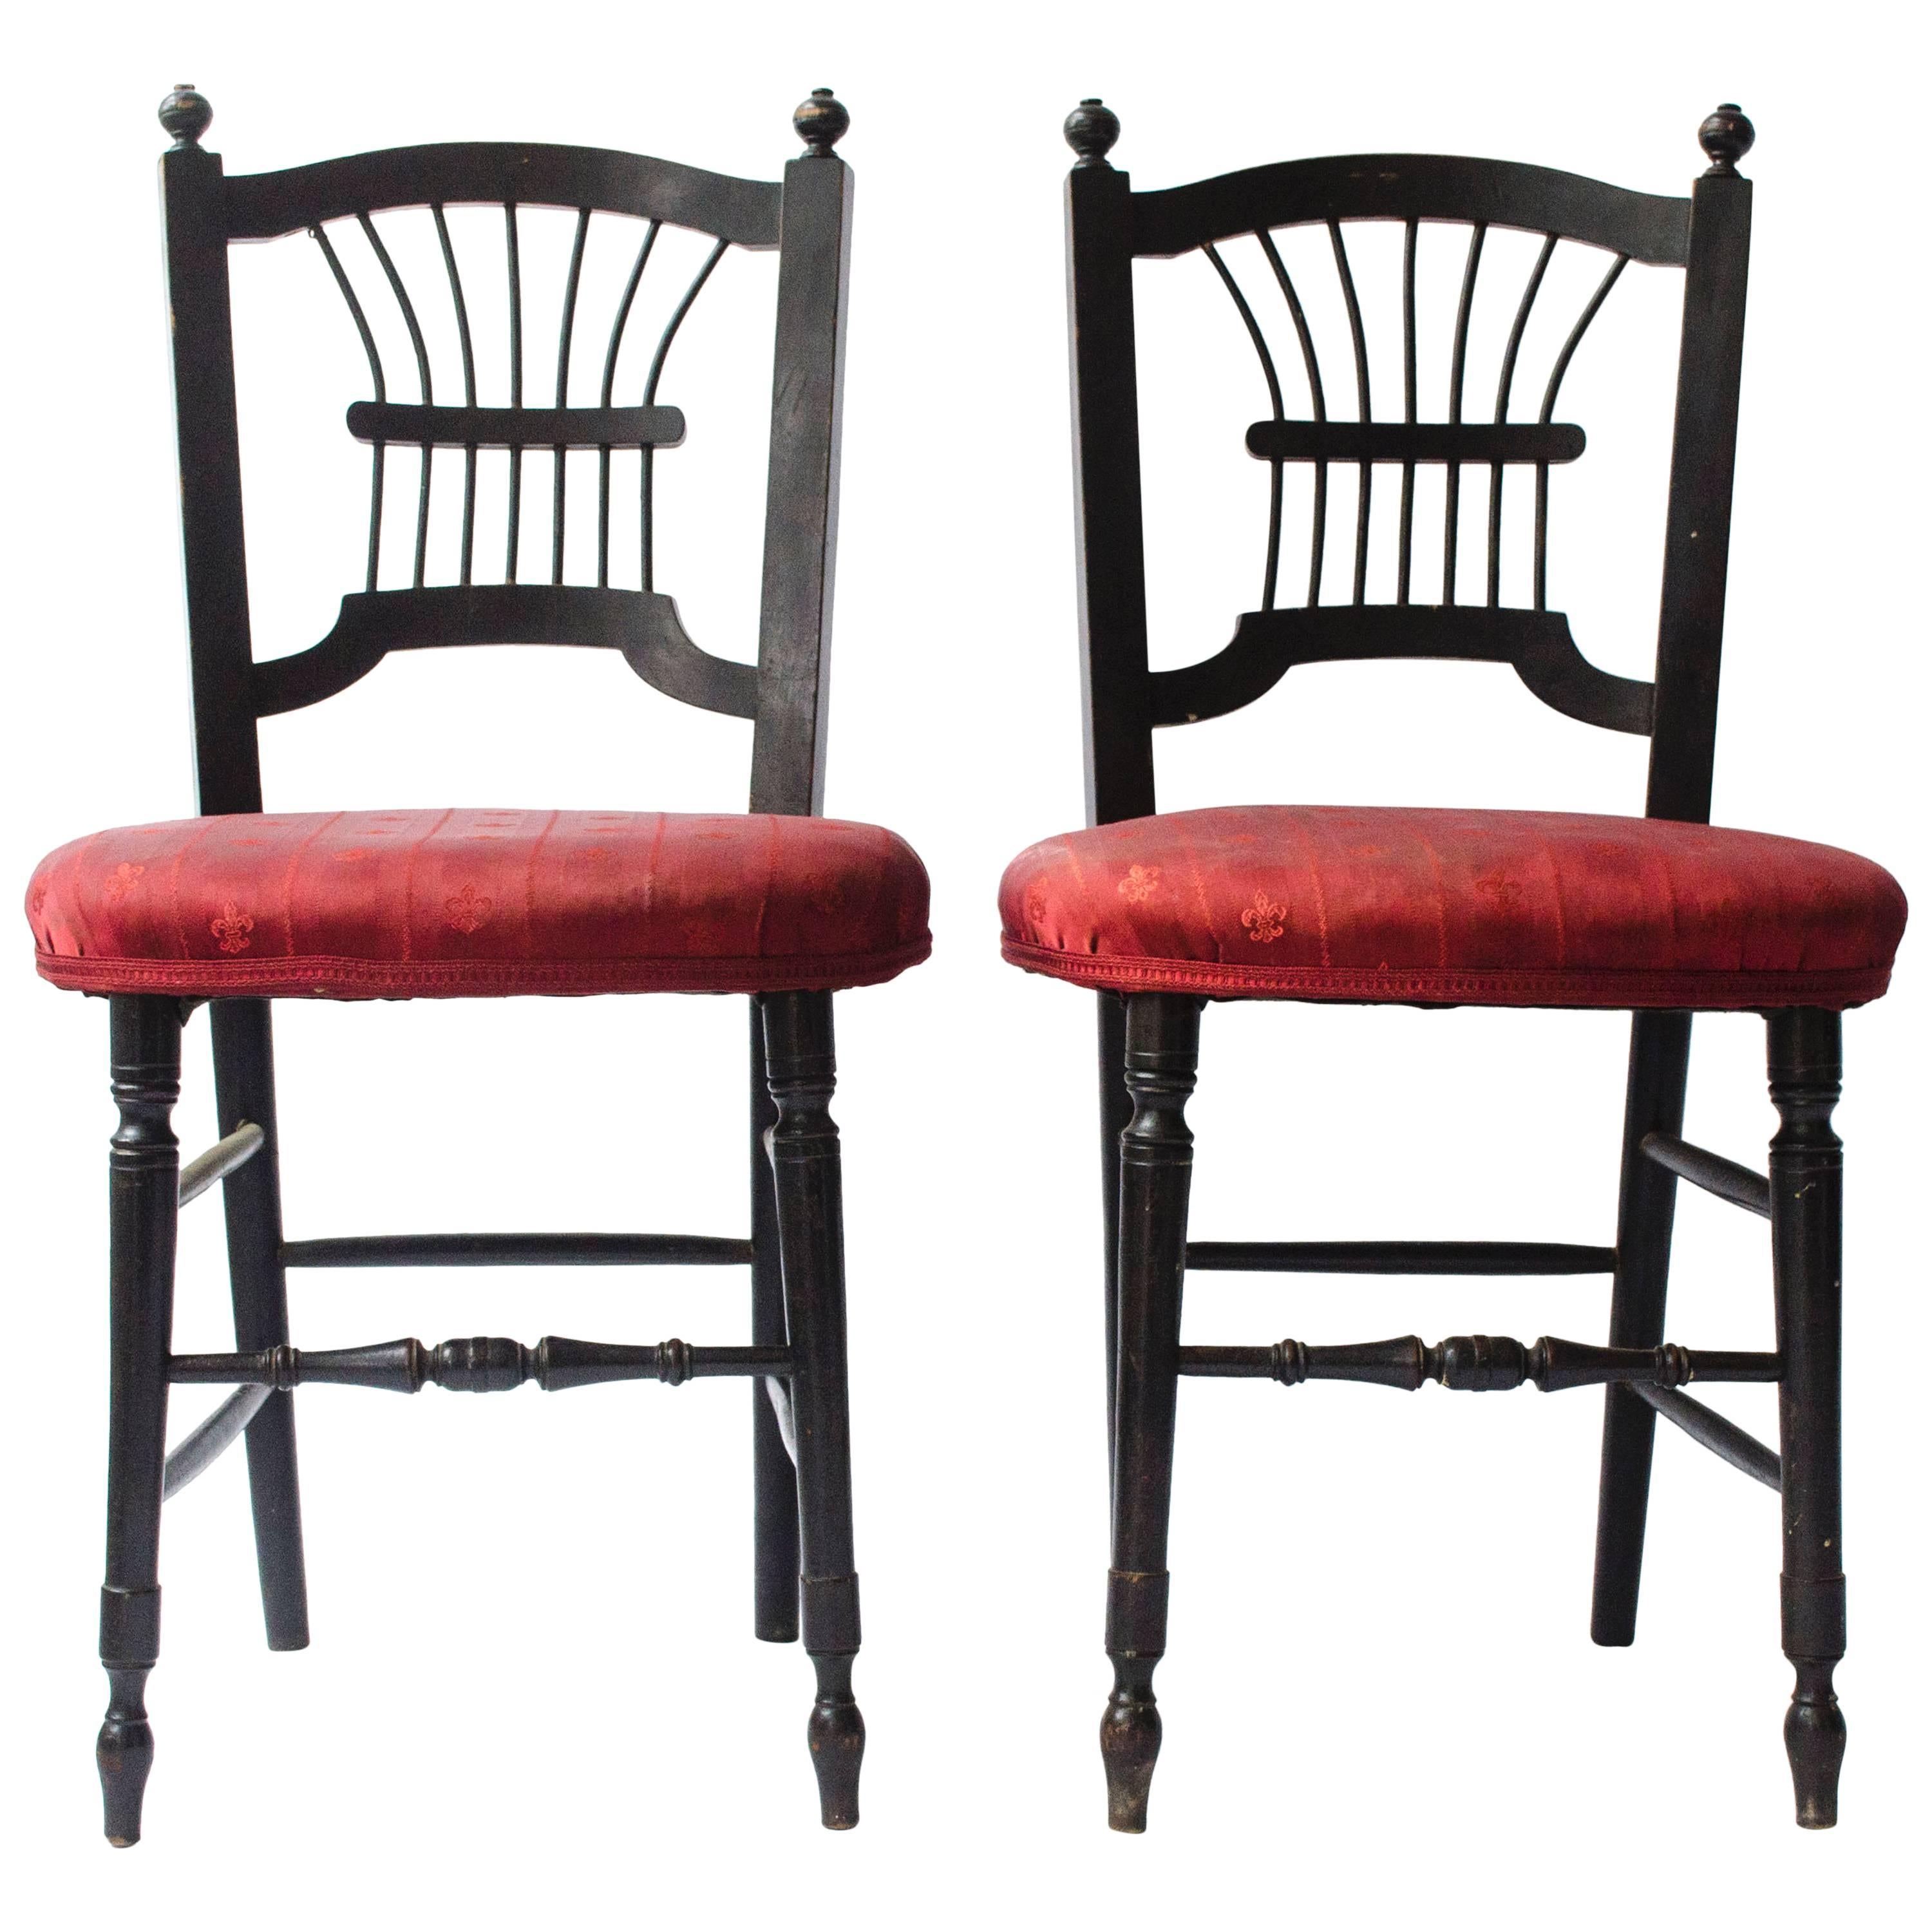 Morris & Co A Pair of Ebonised Sussex Chairs Designed by Dante Gabriel Rossetti